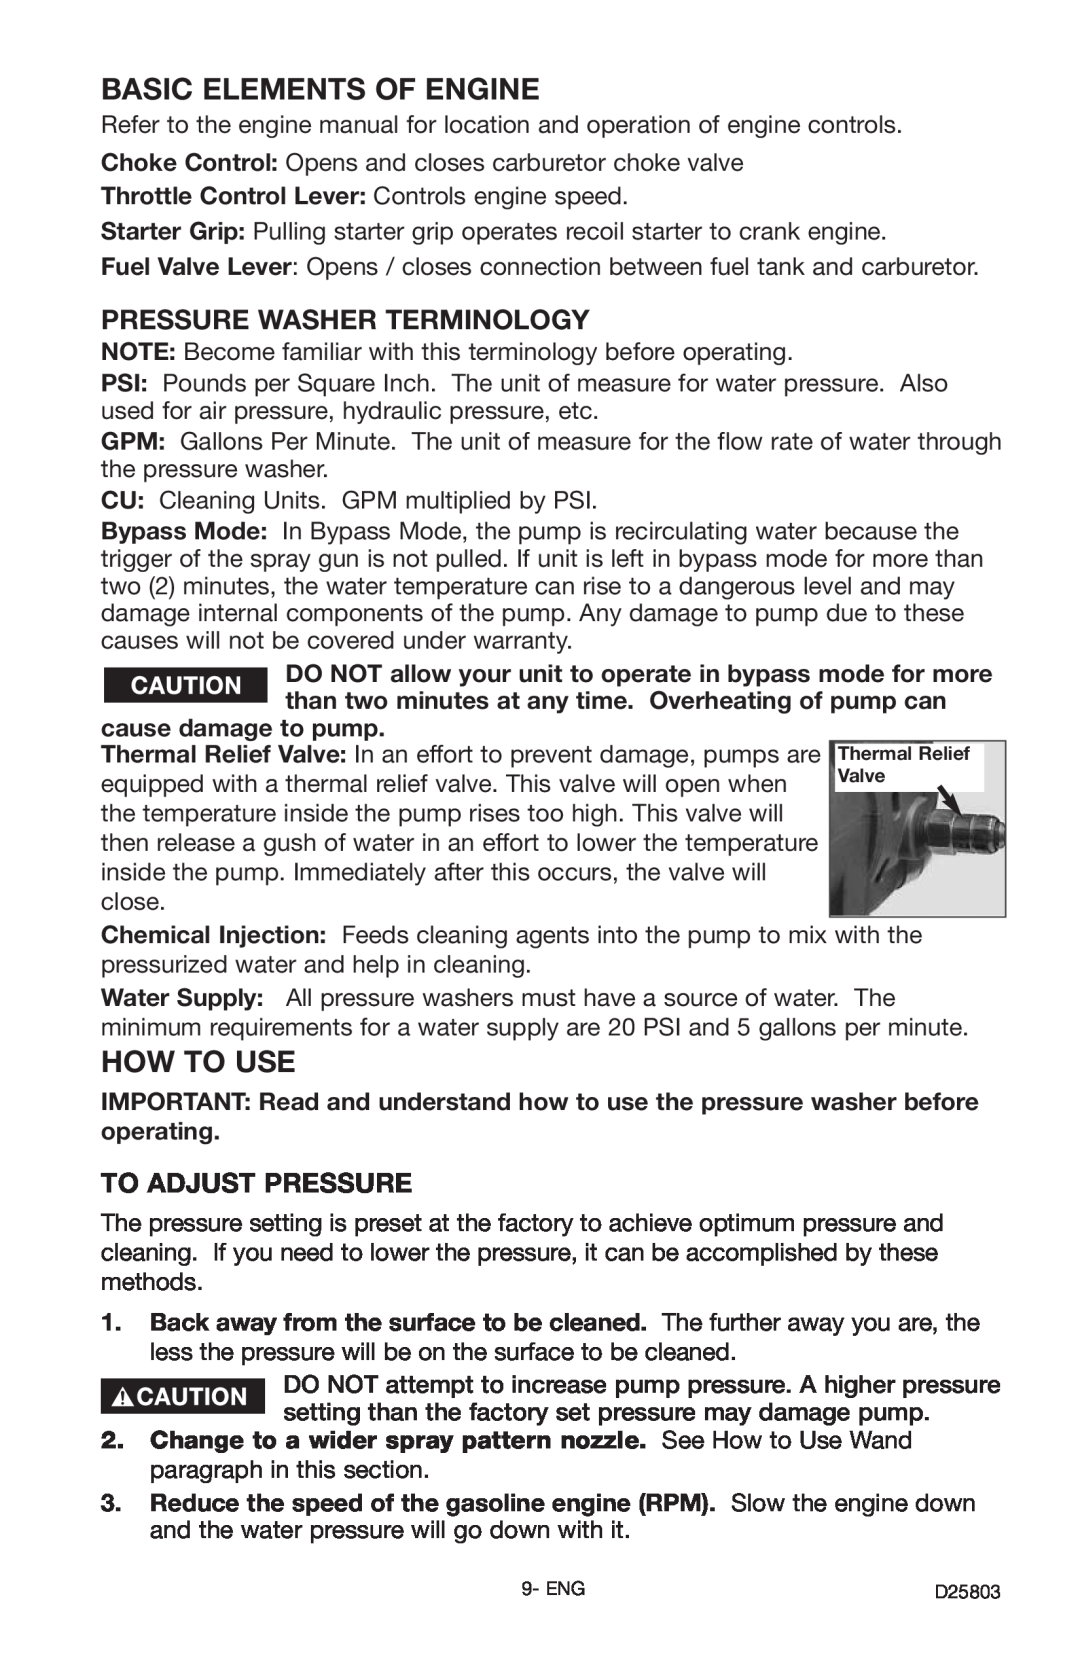 Porter-Cable D25803-025-1, PCH2401 Basic Elements Of Engine, How To Use, Pressure Washer Terminology, To Adjust Pressure 